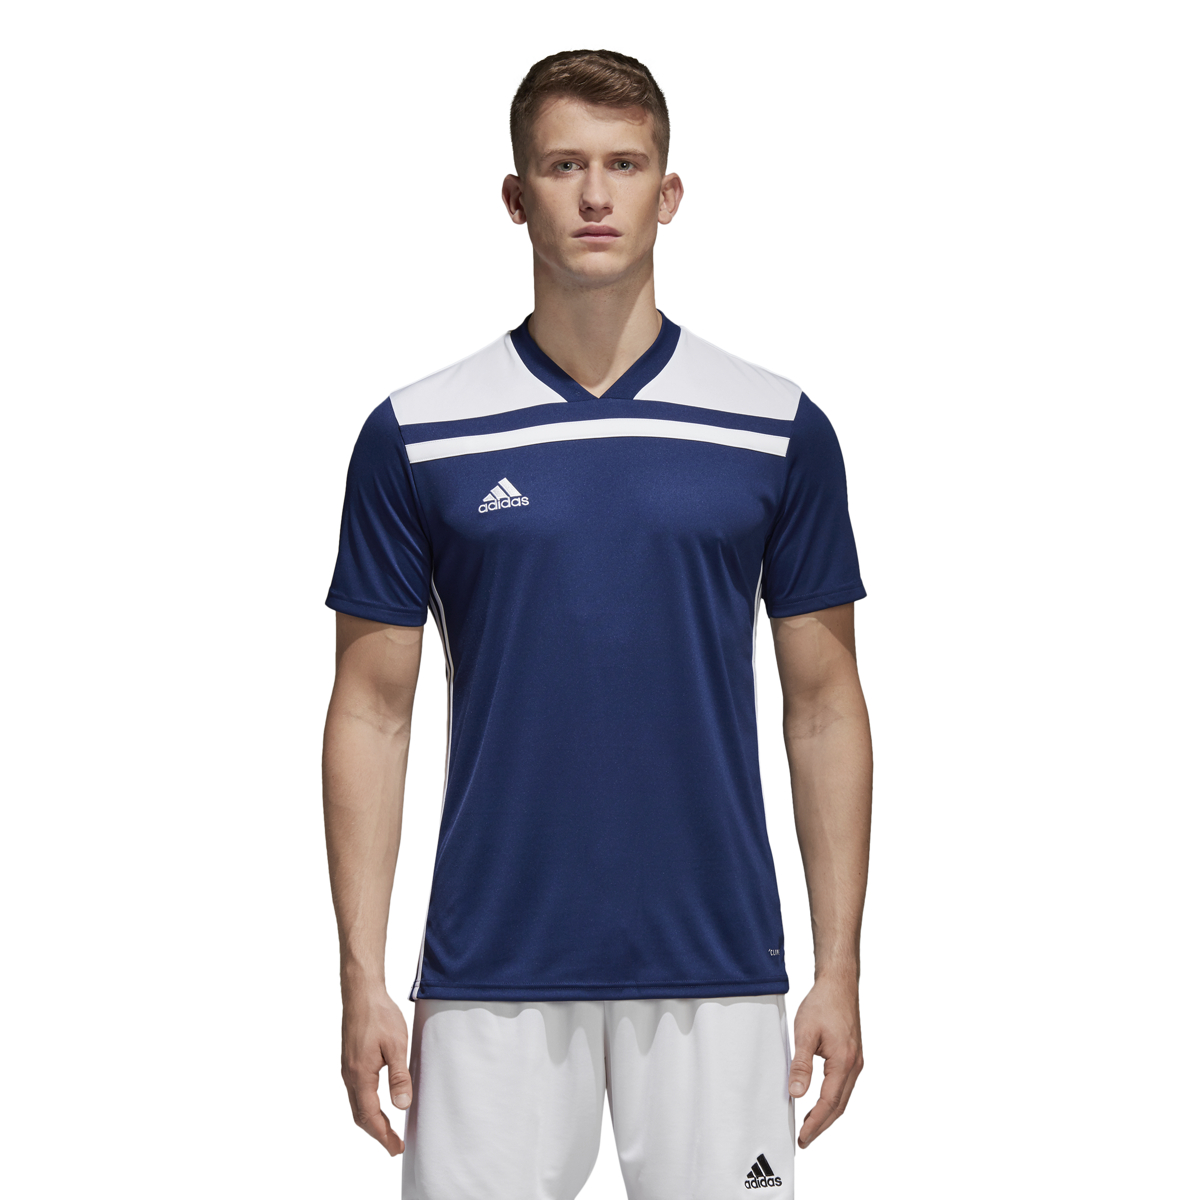 Adidas Mens Soccer Regista 18 Jersey Adidas - Ships Directly From Adidas - image 3 of 6